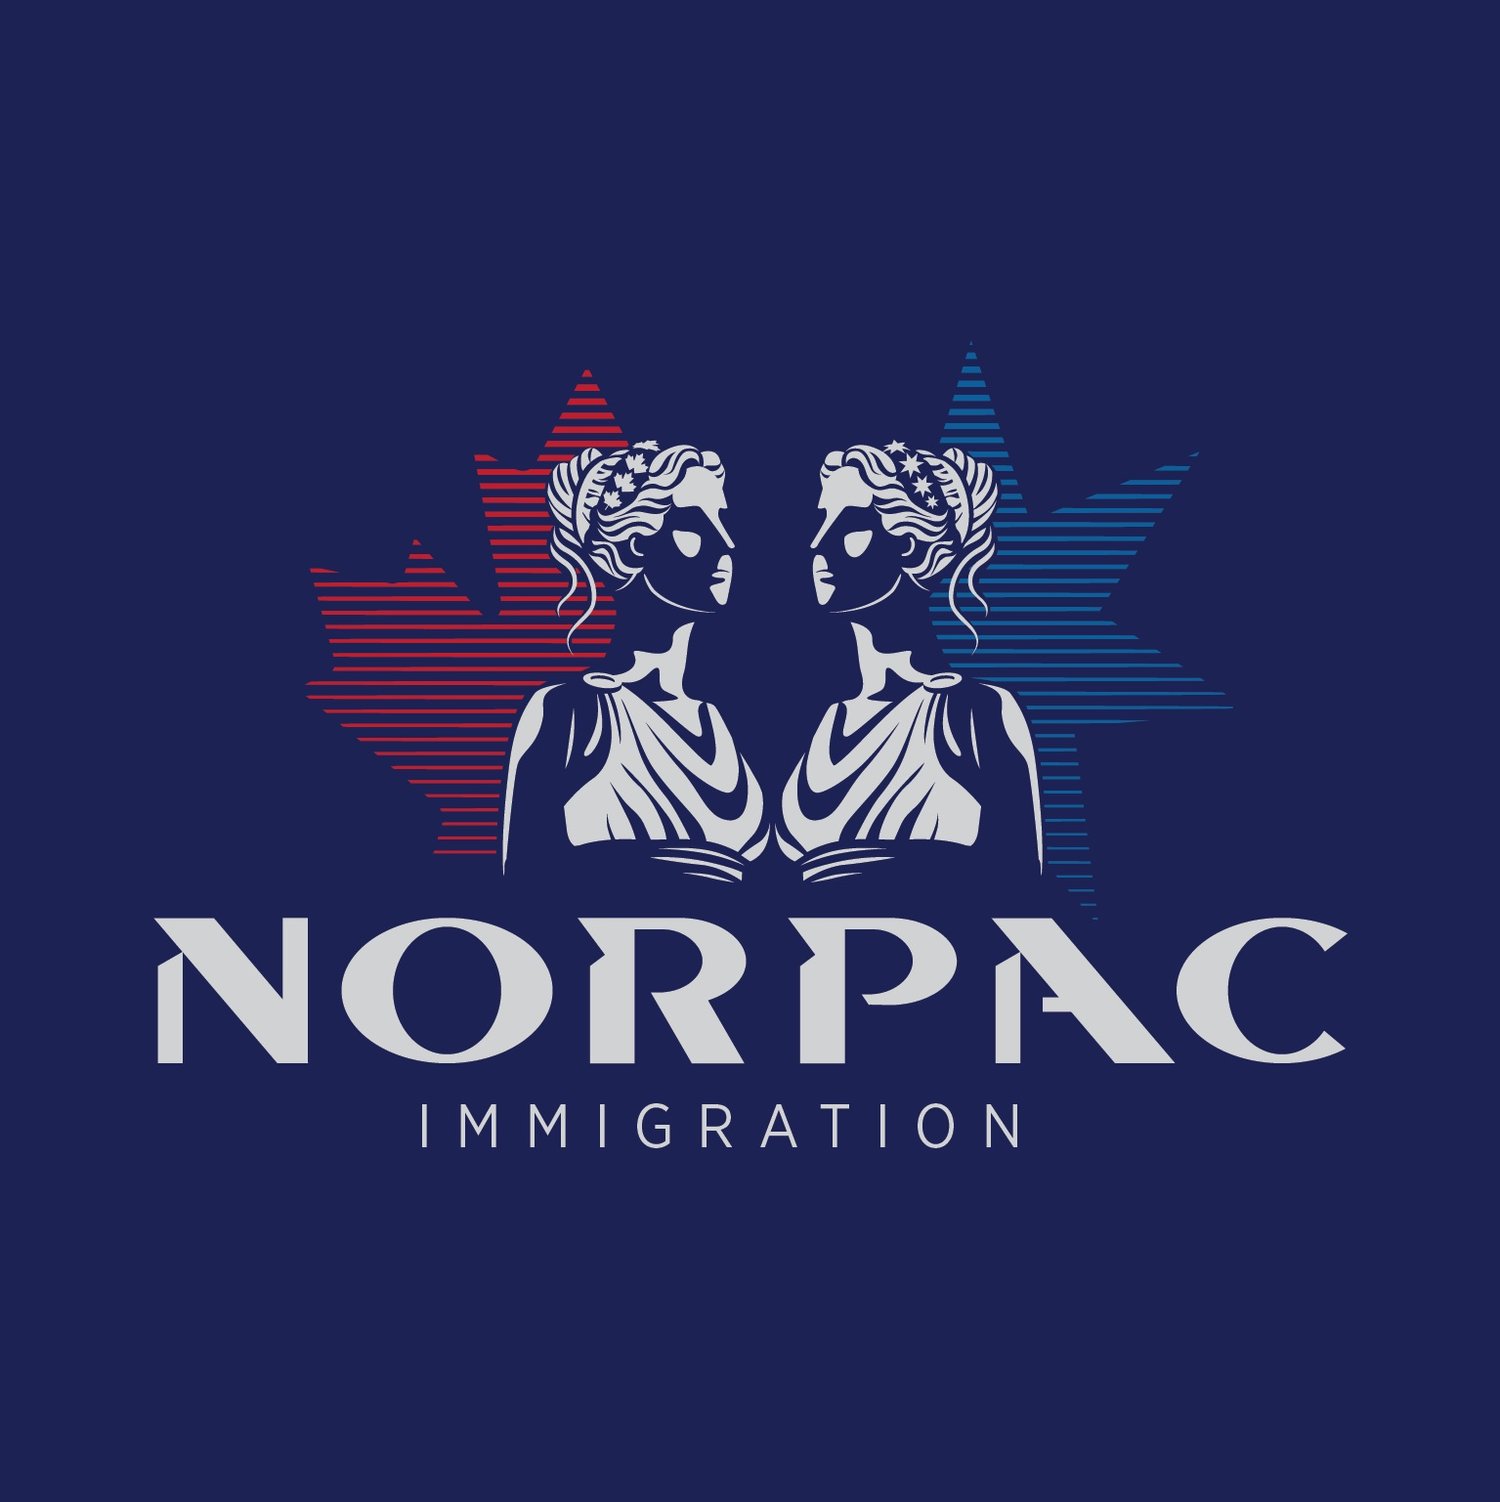 NORPAC Immigration